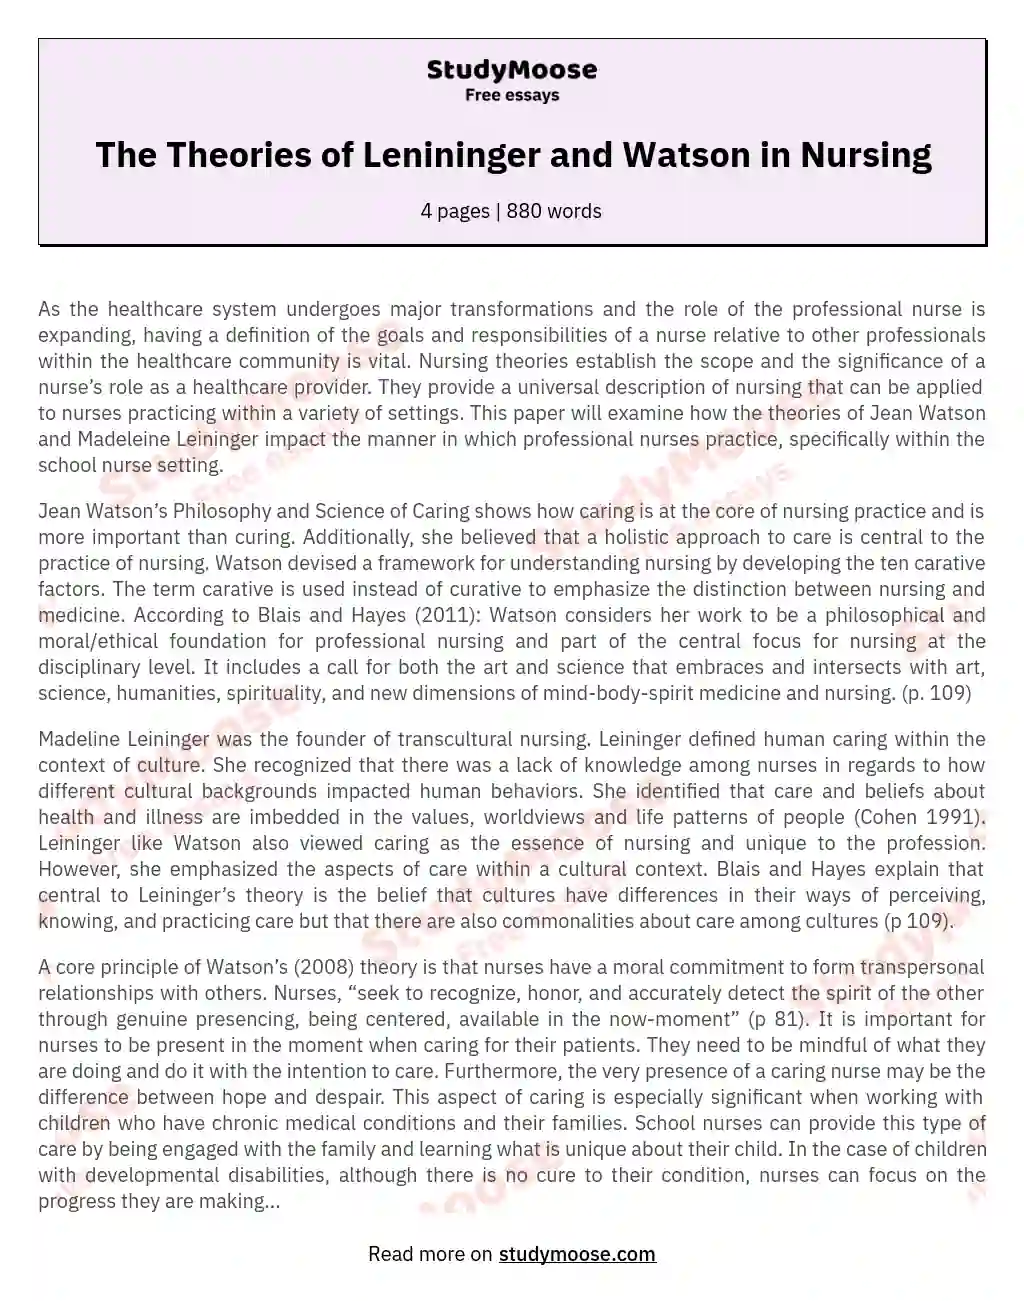 The Theories of Lenininger and Watson in Nursing essay